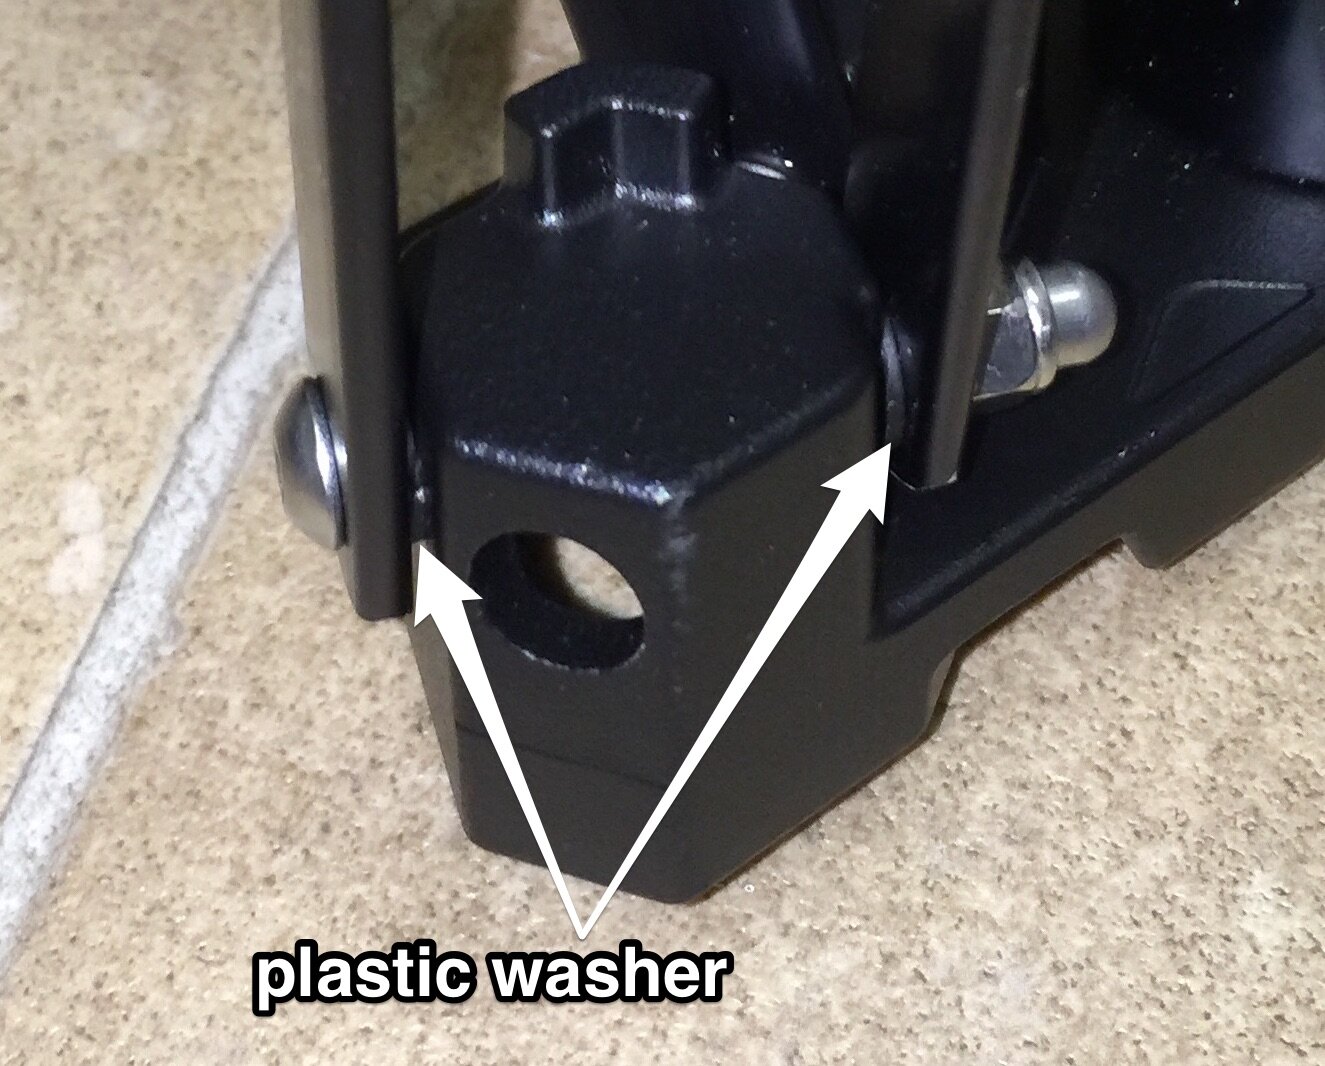 plastic washer placement